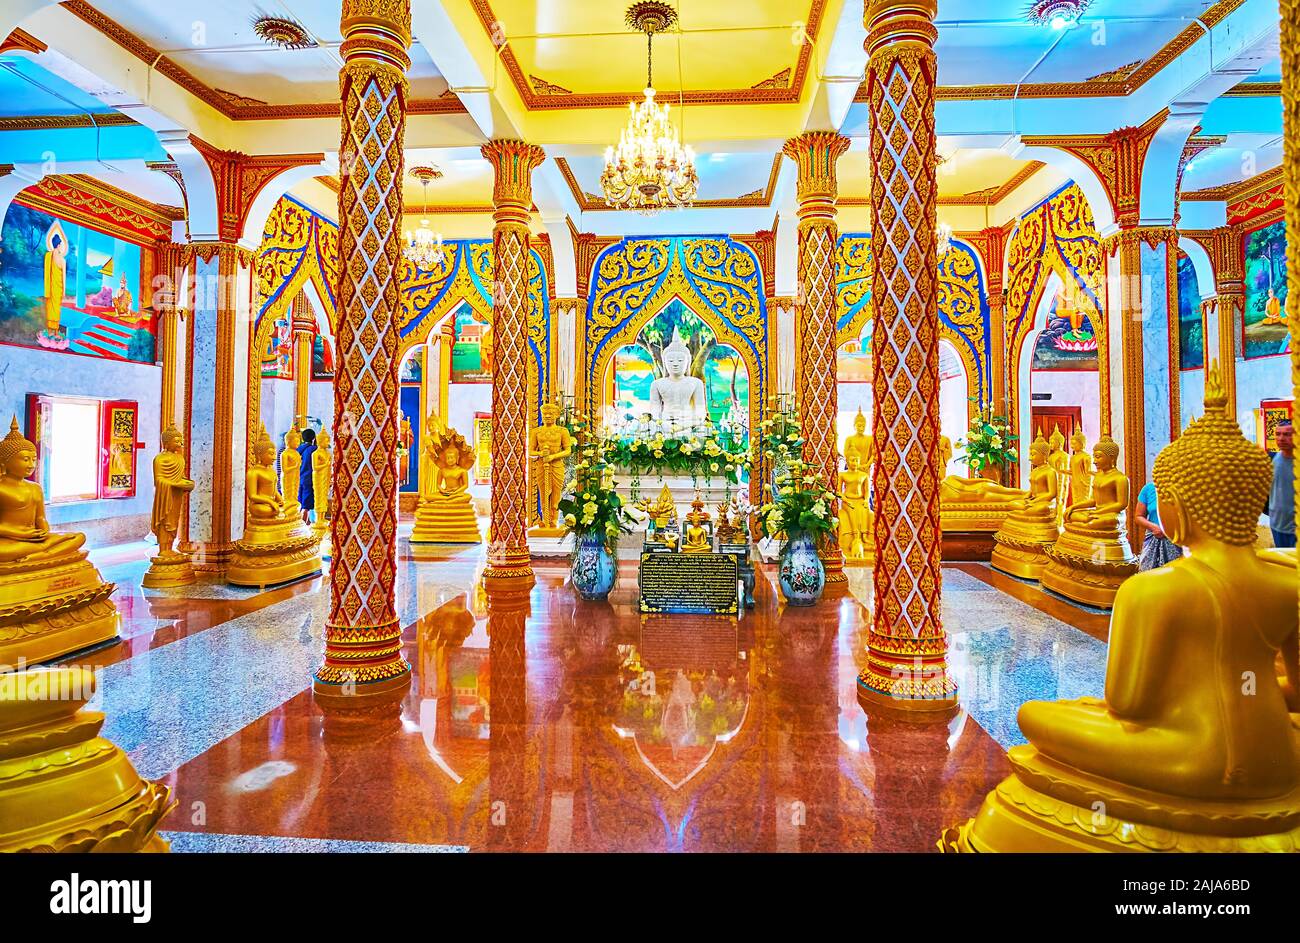 CHALONG, THAILAND - APRIL 30, 2019: The prayer hall of Wat Chalong Pagoda is decorated with scenic columns, murals, depicting life of Buddha, gilt ima Stock Photo